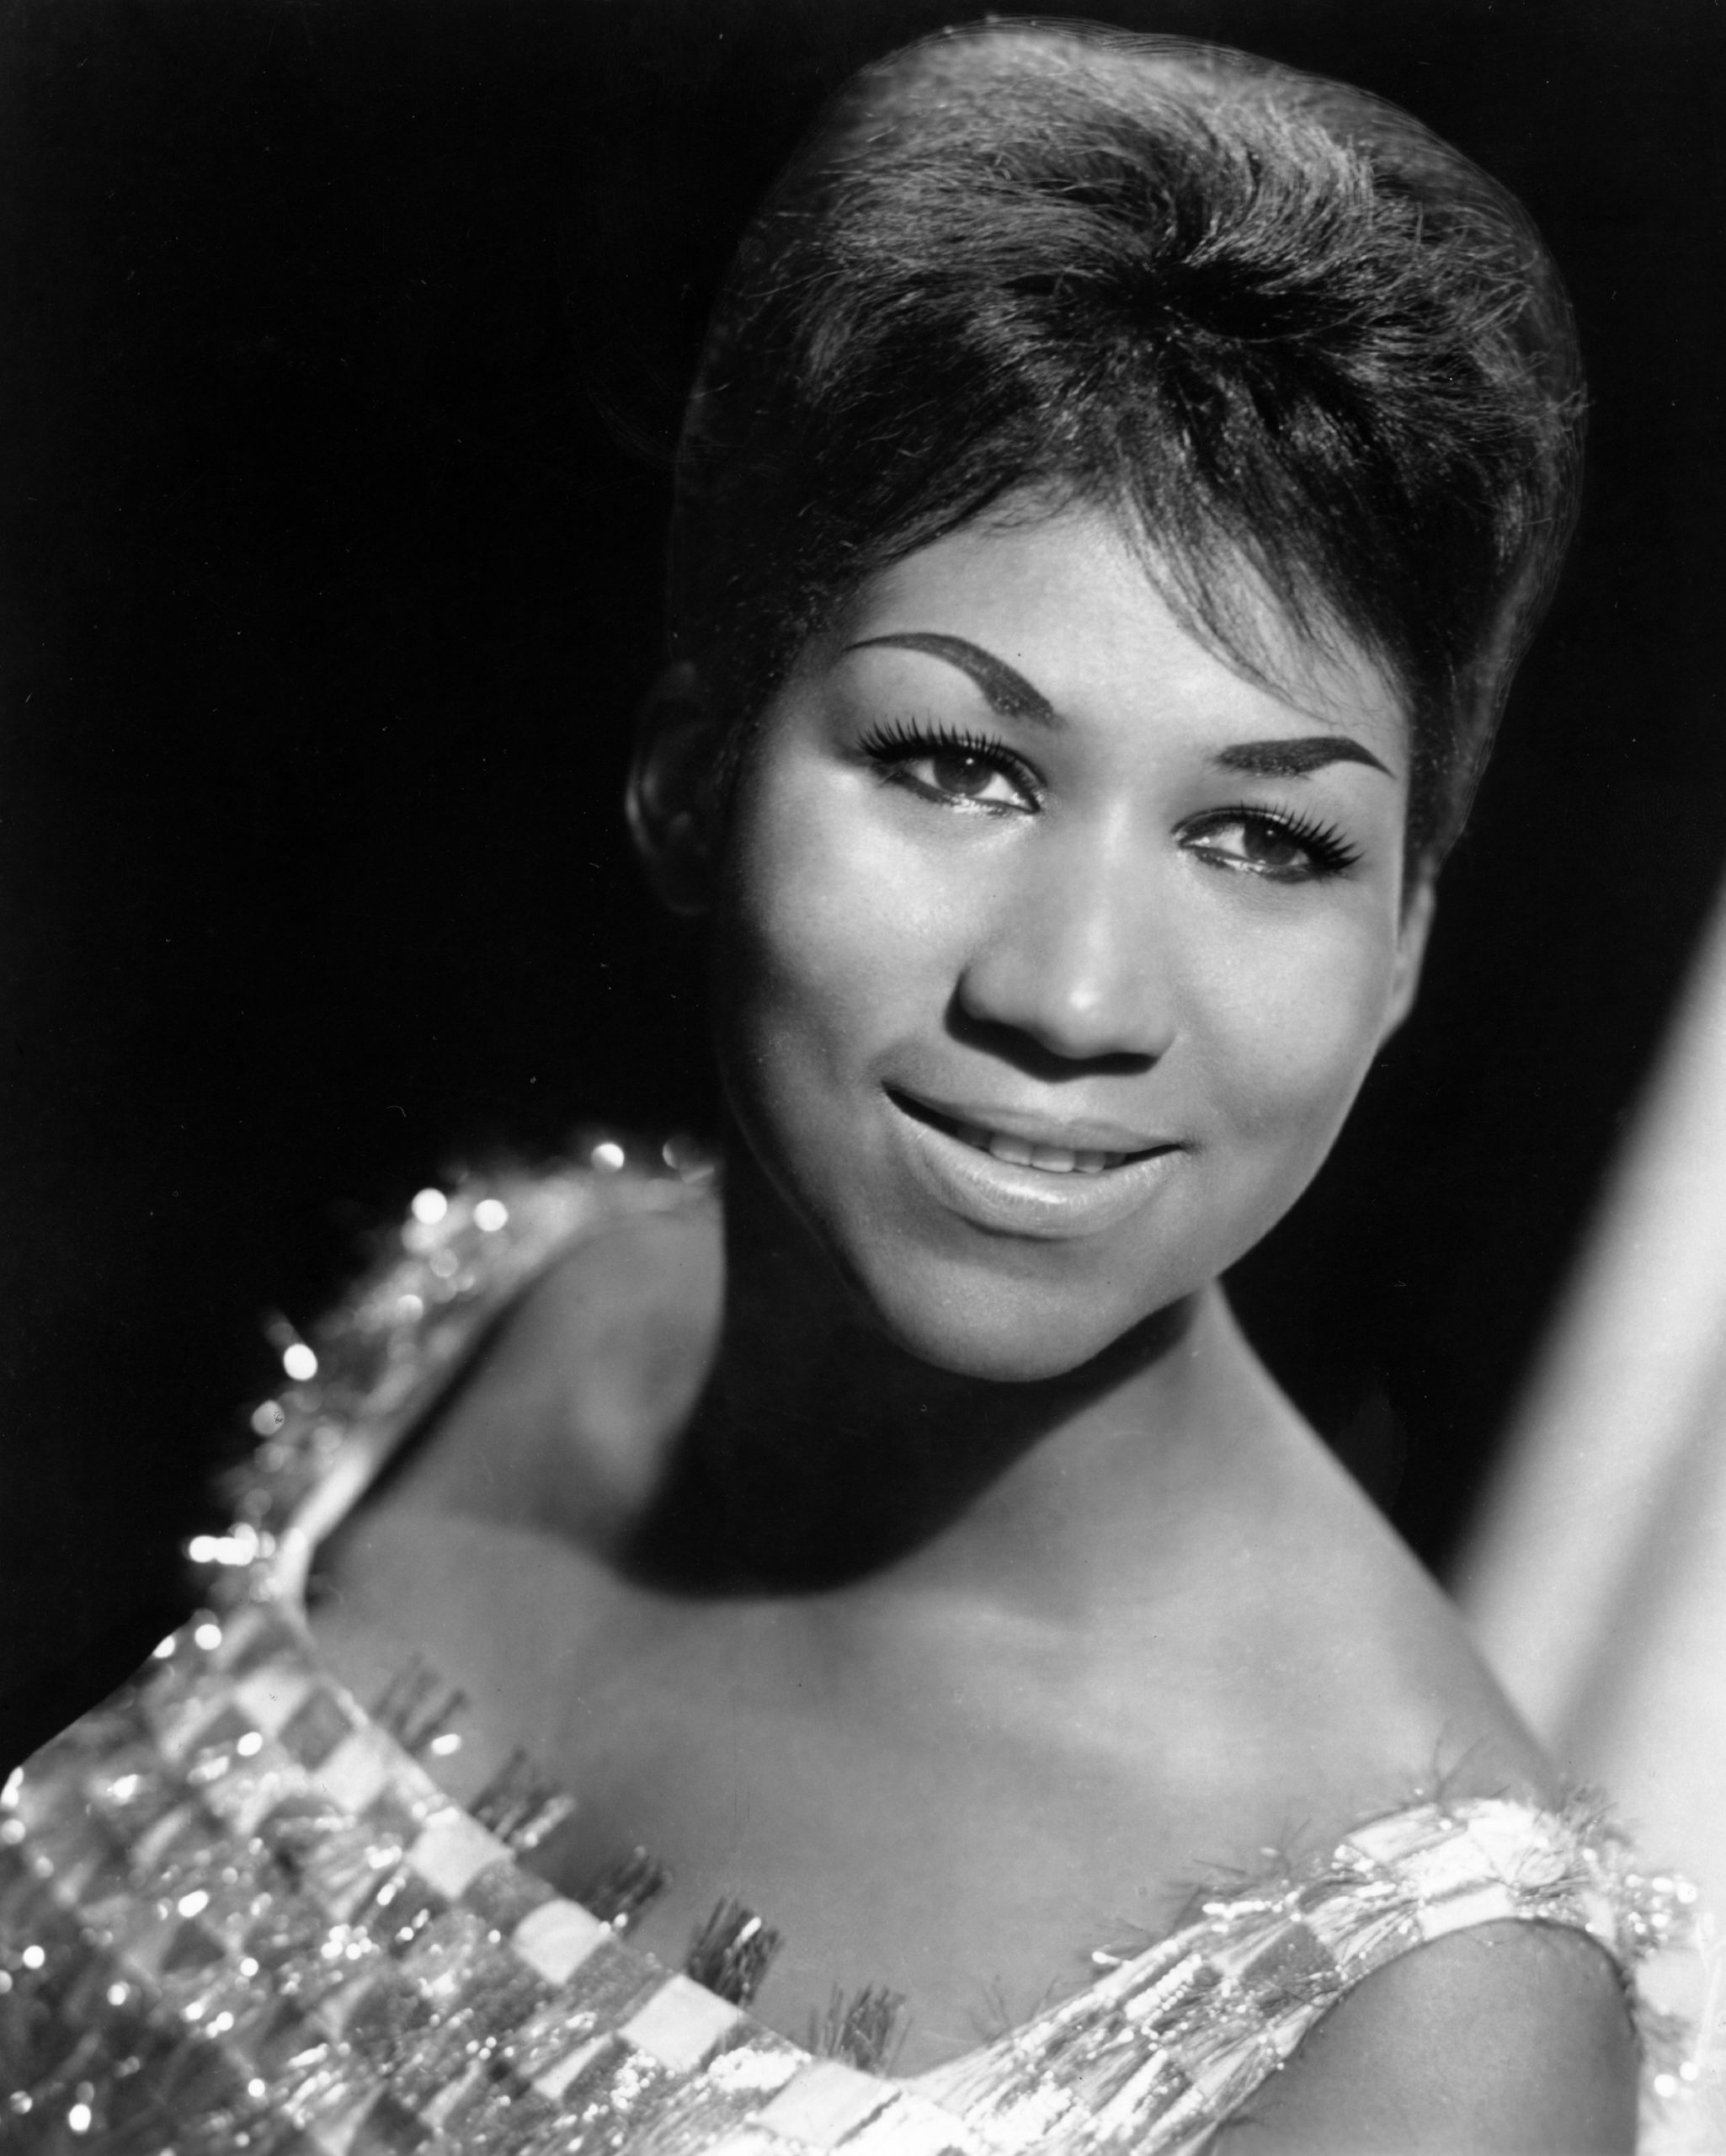 CIRCA 1965:  Soul singer Aretha Franklin poses for a portrait in circa 1965. (Photo by Michael Ochs Archives/Getty Images)